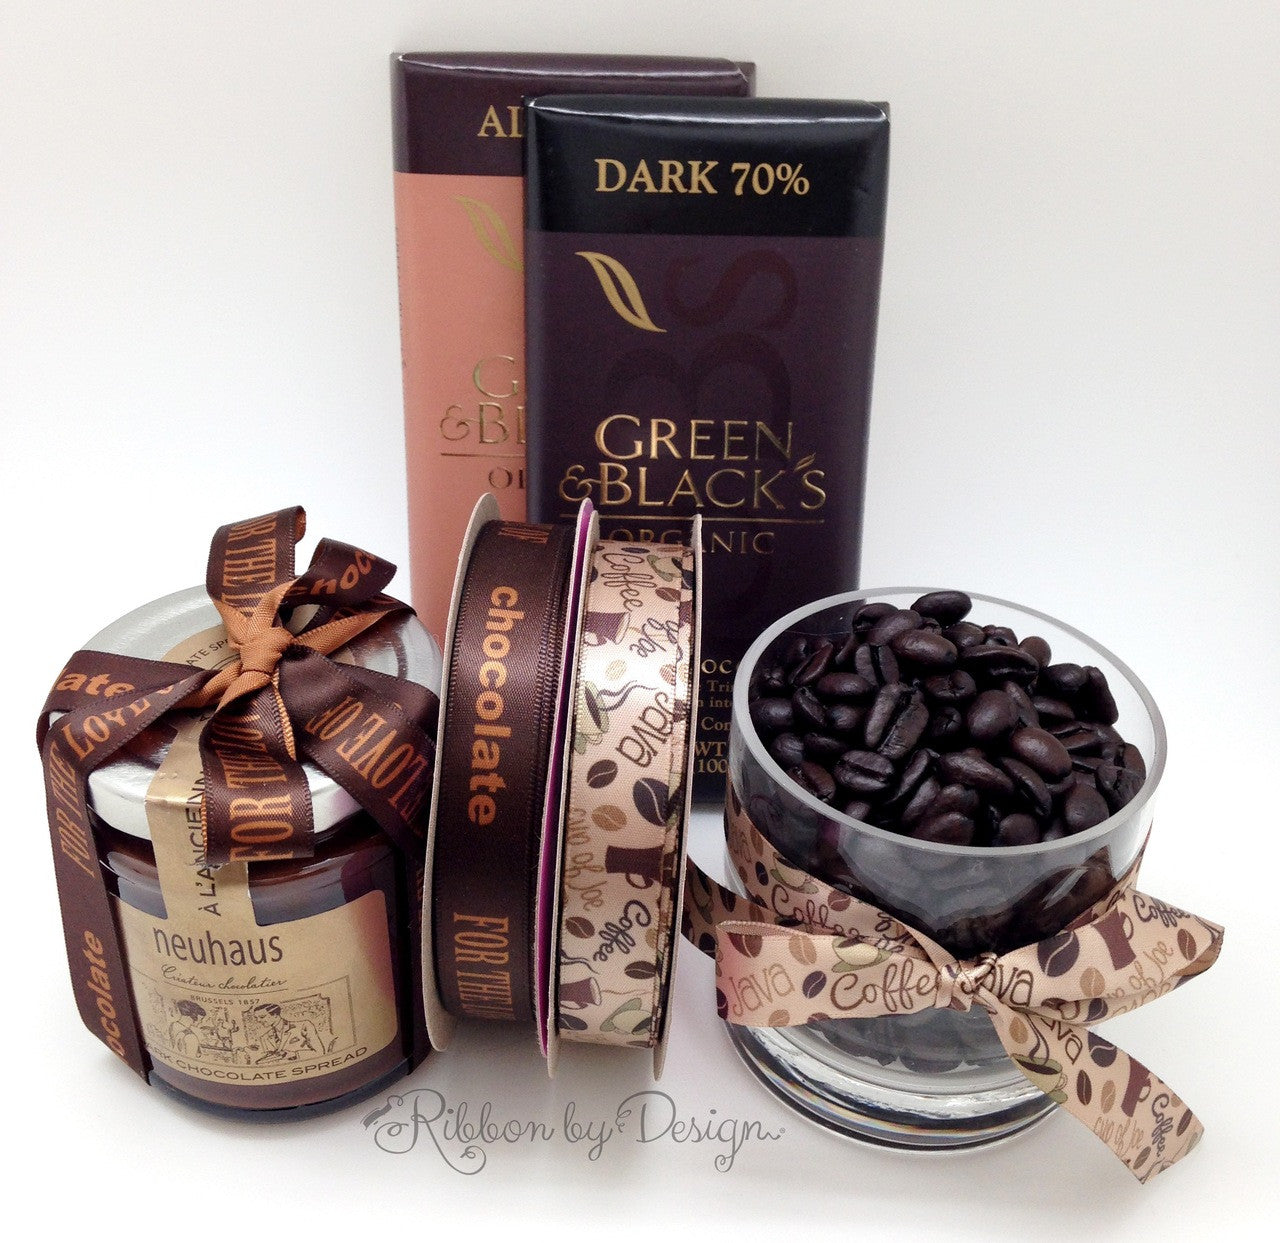 Nothing goes better with coffee than chocolate! We have both in our collection!